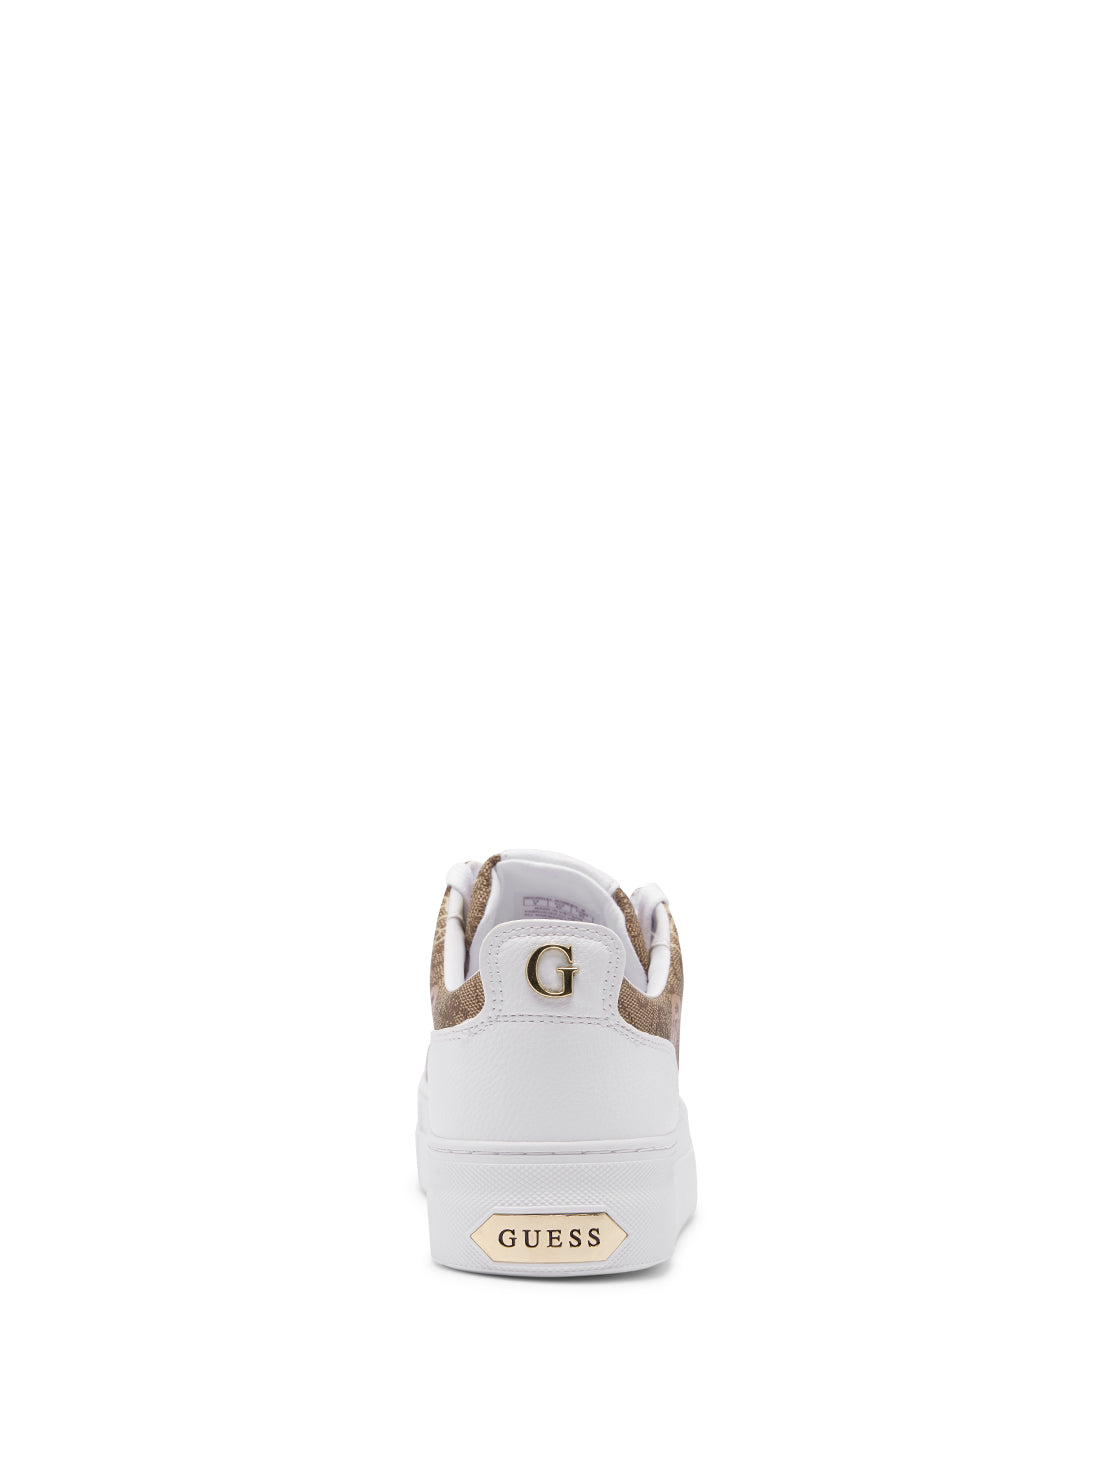 GUESS Womens Brown Quattro G Gianele Low-Top Sneakers back view